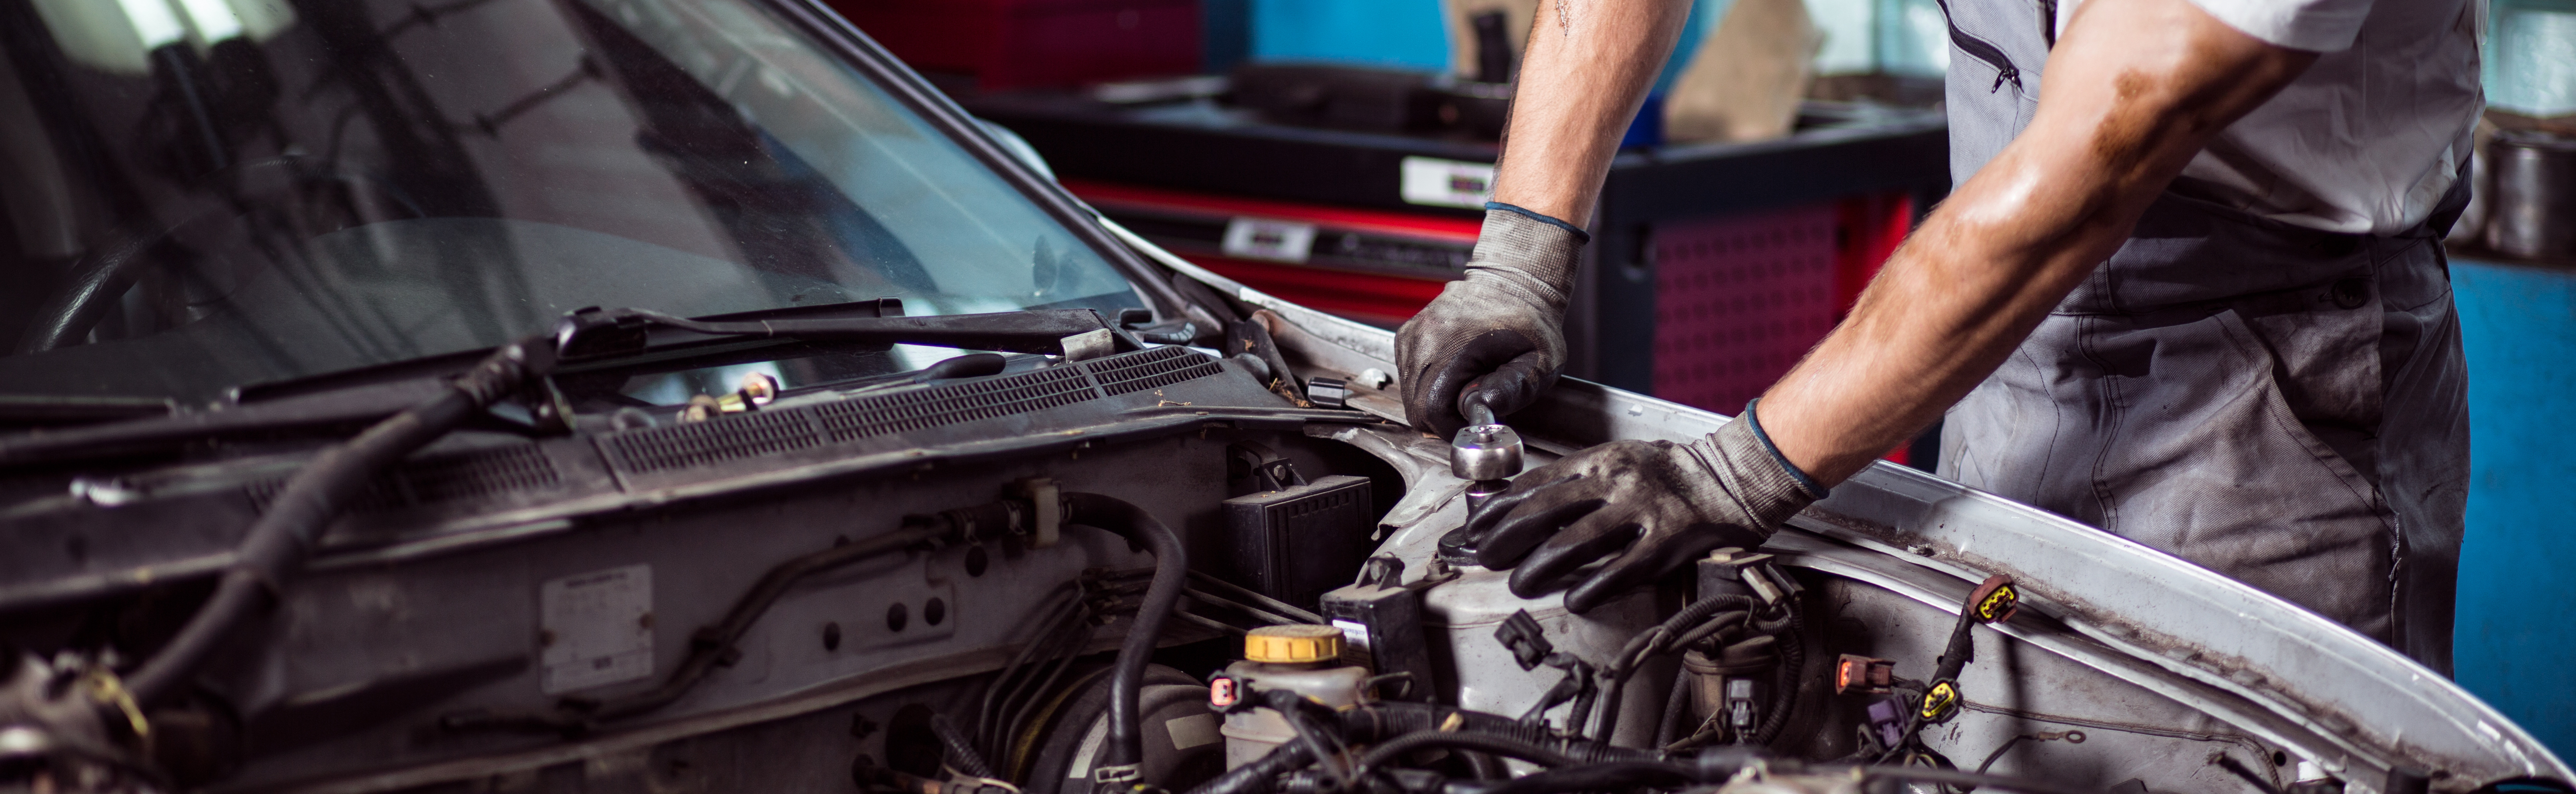 KEEP YOUR CAR RUNNING LIKE NEW WITH PREVENTIVE FACTORY MAINTENANCE